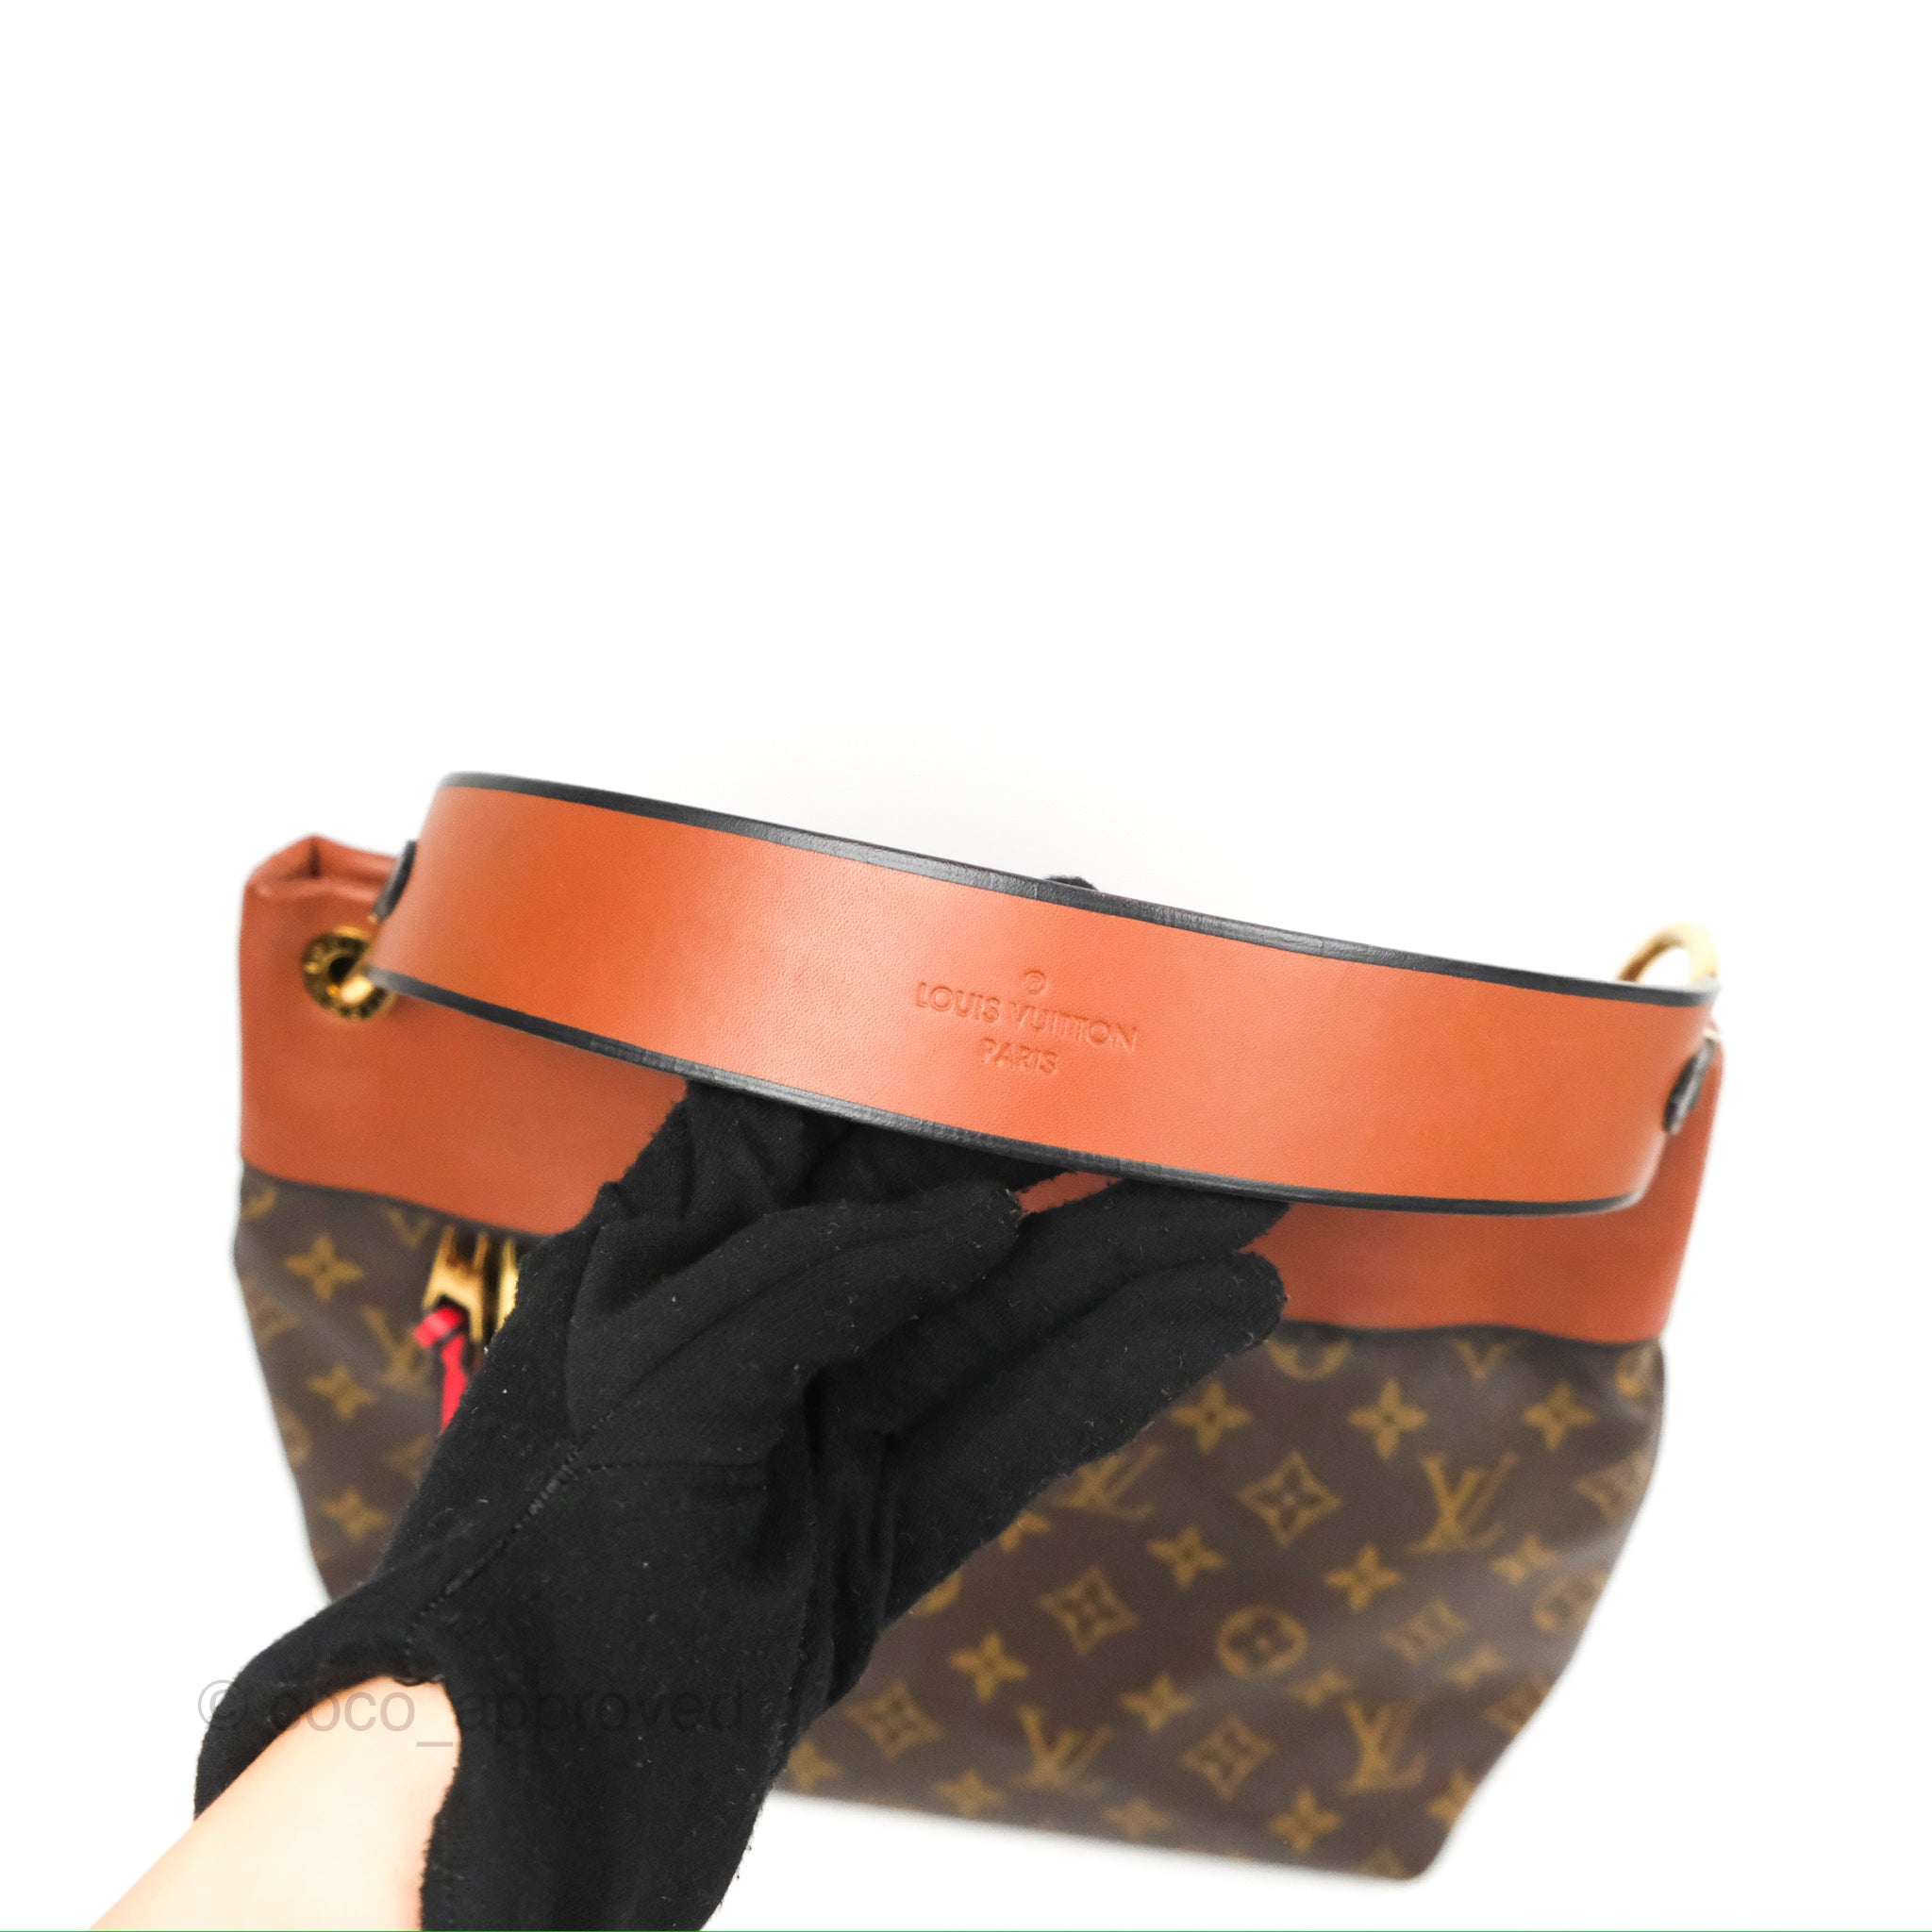 Sold at Auction: LOUIS VUITTON Tuileries Hobo Bag